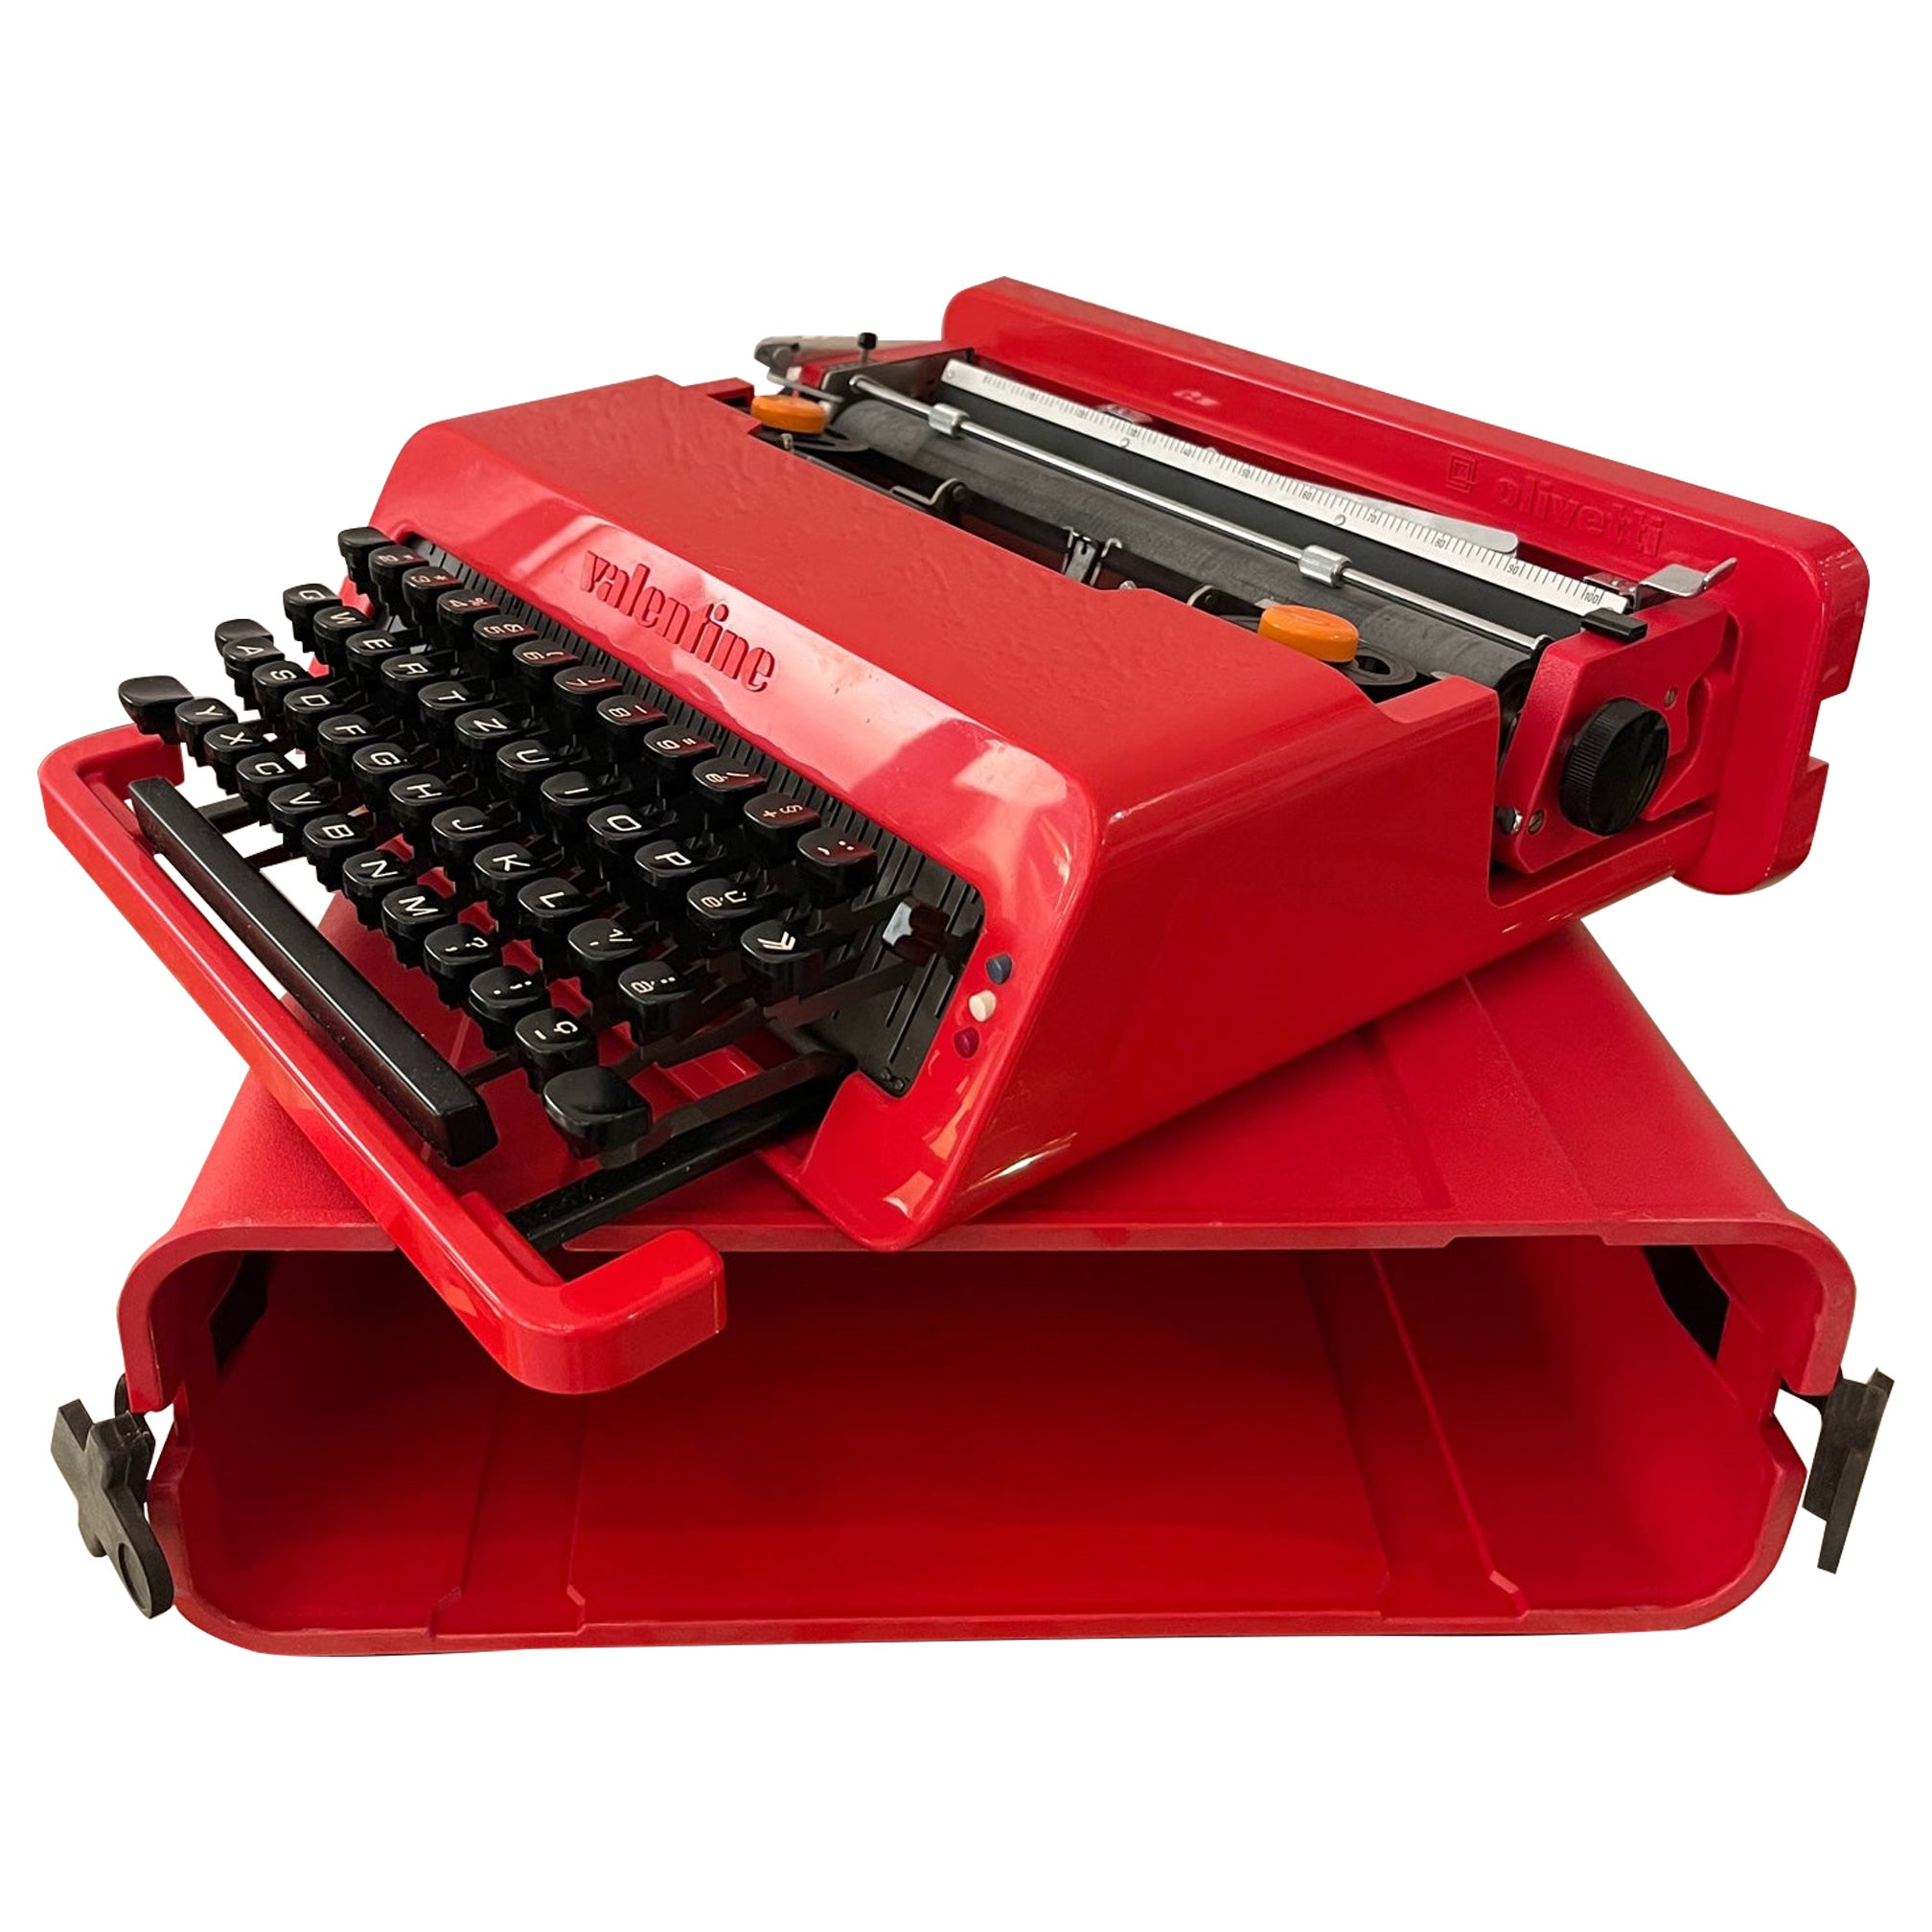 Valentine Typewriter by Ettore Sottsass produced by Olivetti, Italy ca. 1960s